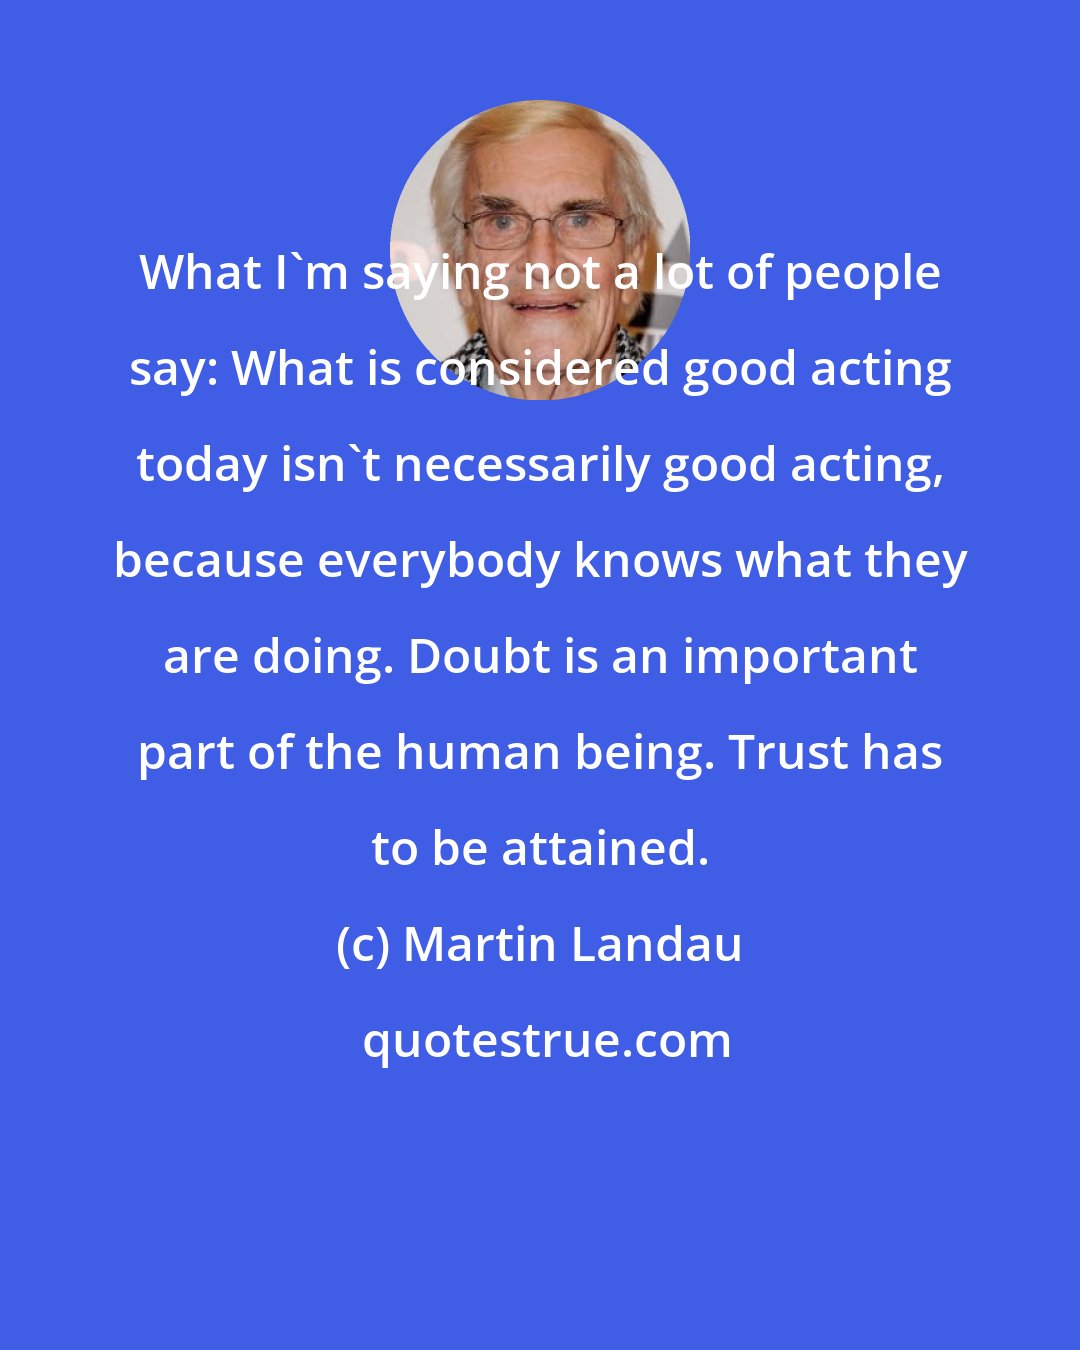 Martin Landau: What I'm saying not a lot of people say: What is considered good acting today isn't necessarily good acting, because everybody knows what they are doing. Doubt is an important part of the human being. Trust has to be attained.